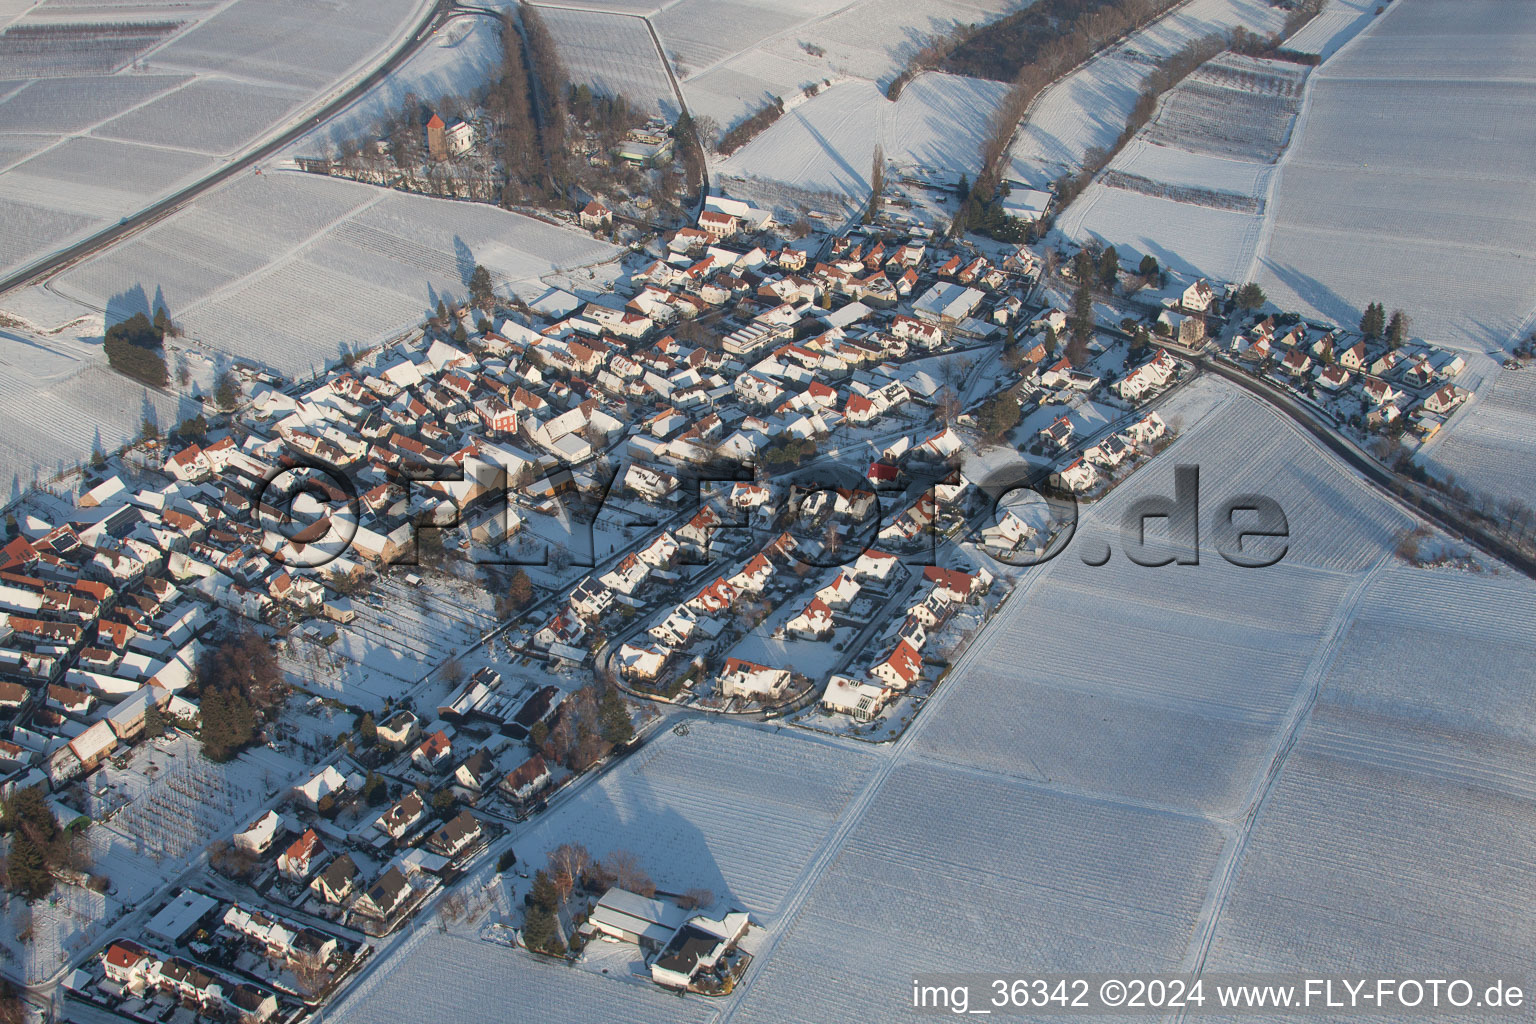 In the snow in winter in the district Mörzheim in Landau in der Pfalz in the state Rhineland-Palatinate, Germany from the plane